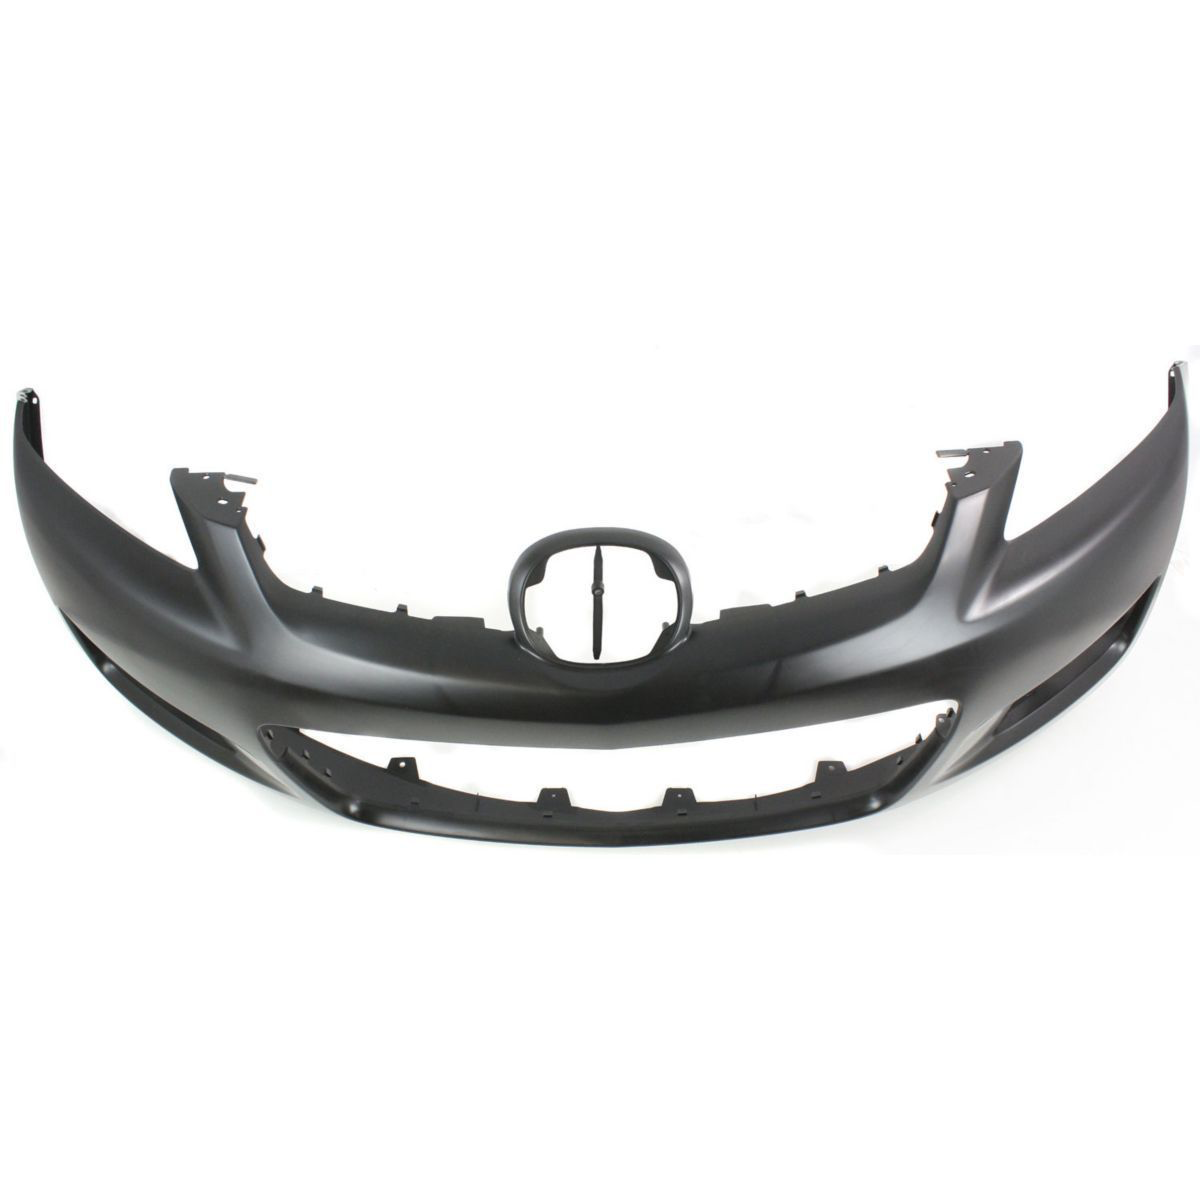 2007-2009 MAZDA CX-7 Front Bumper Cover Painted to Match